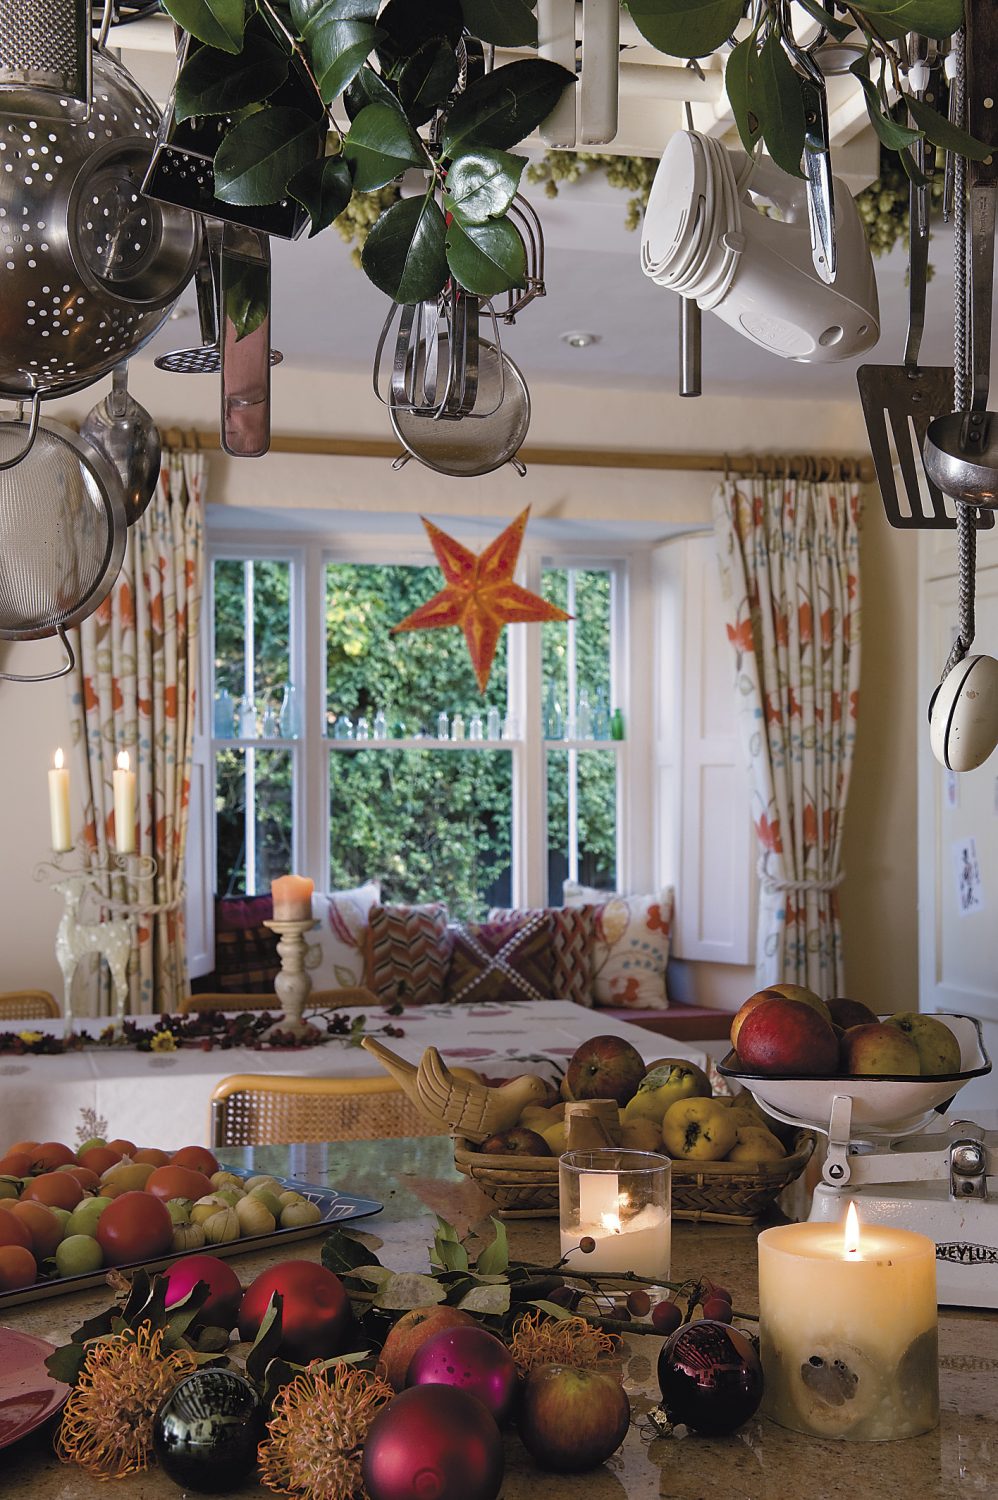 stars like the one in this bay window in the kitchen are a regular sight in India over Christmas